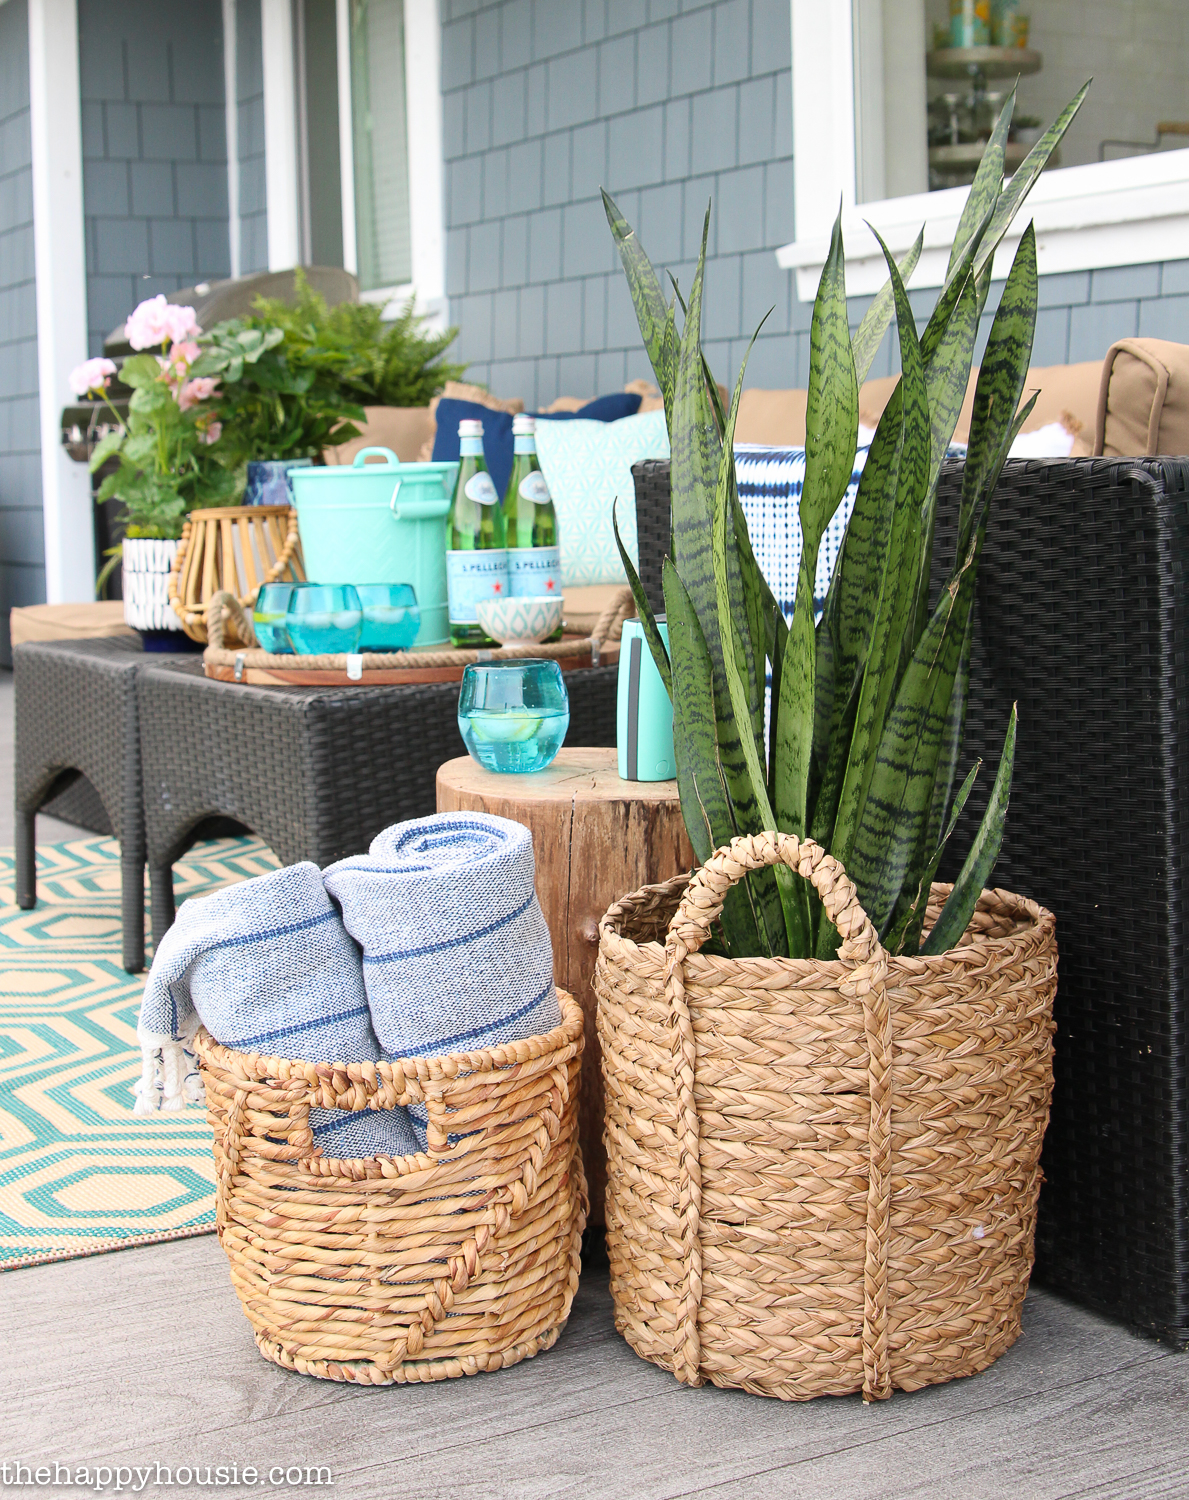 Two baskets are filled with towels and a plant.